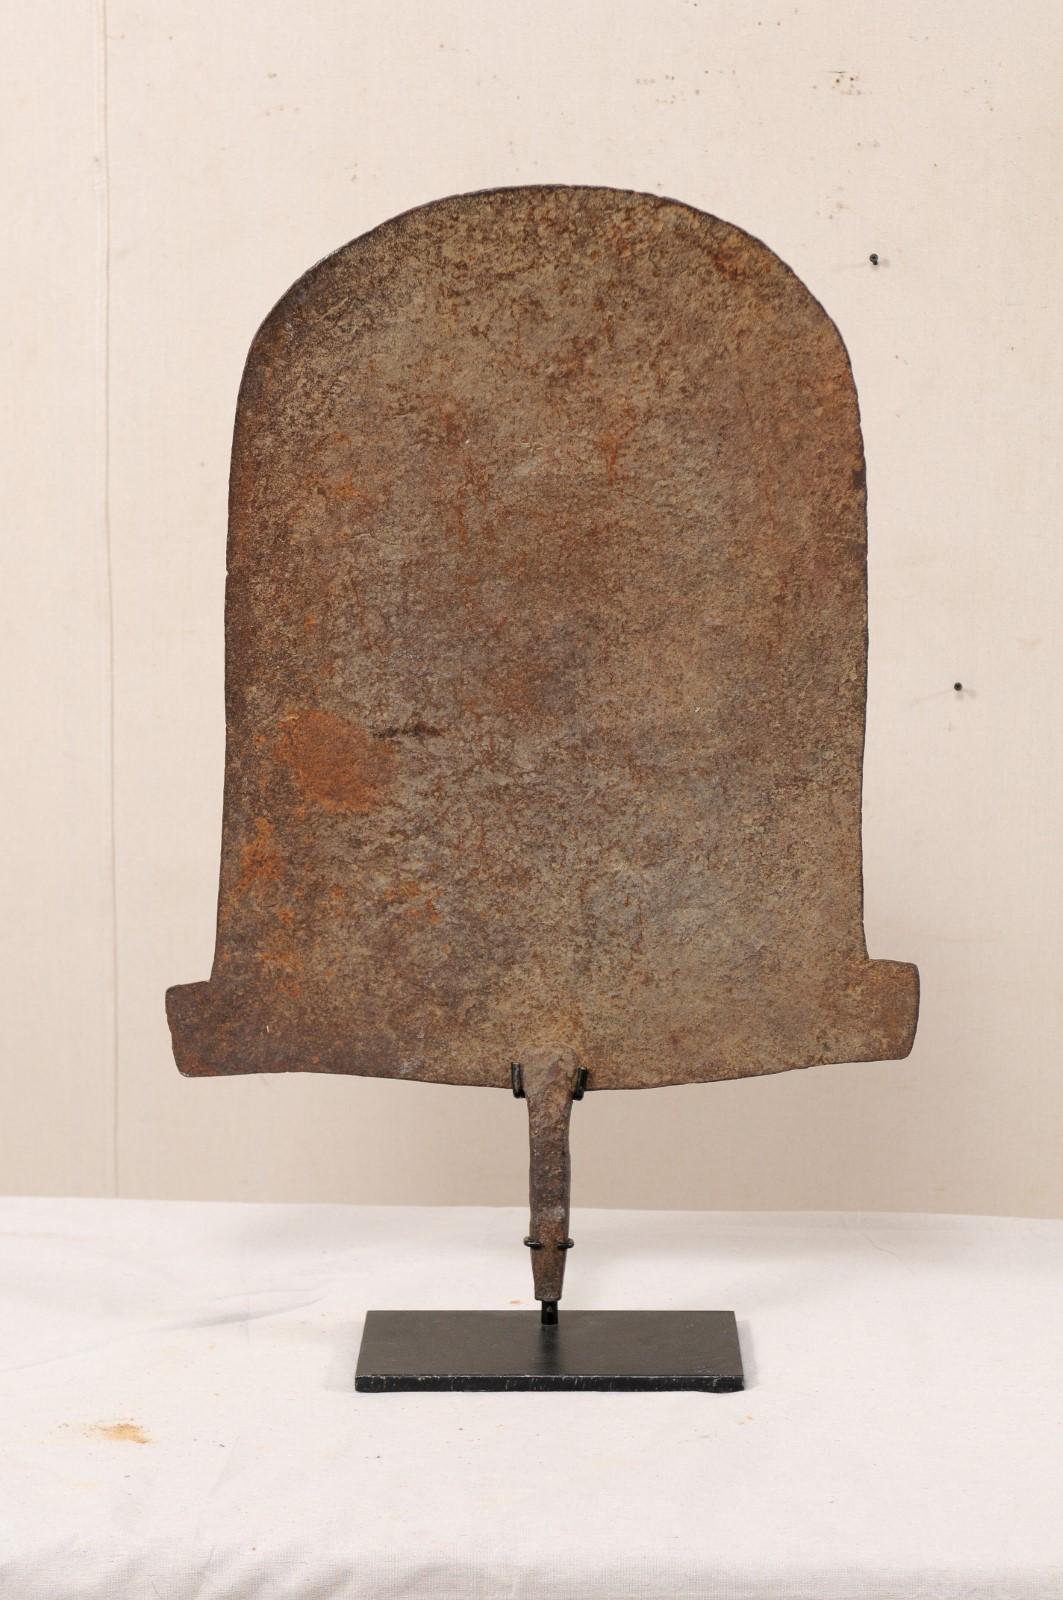 A large specimen of African iron money currency from the early 20th century on custom Stand. This antique iron monetary piece is often referred to as 